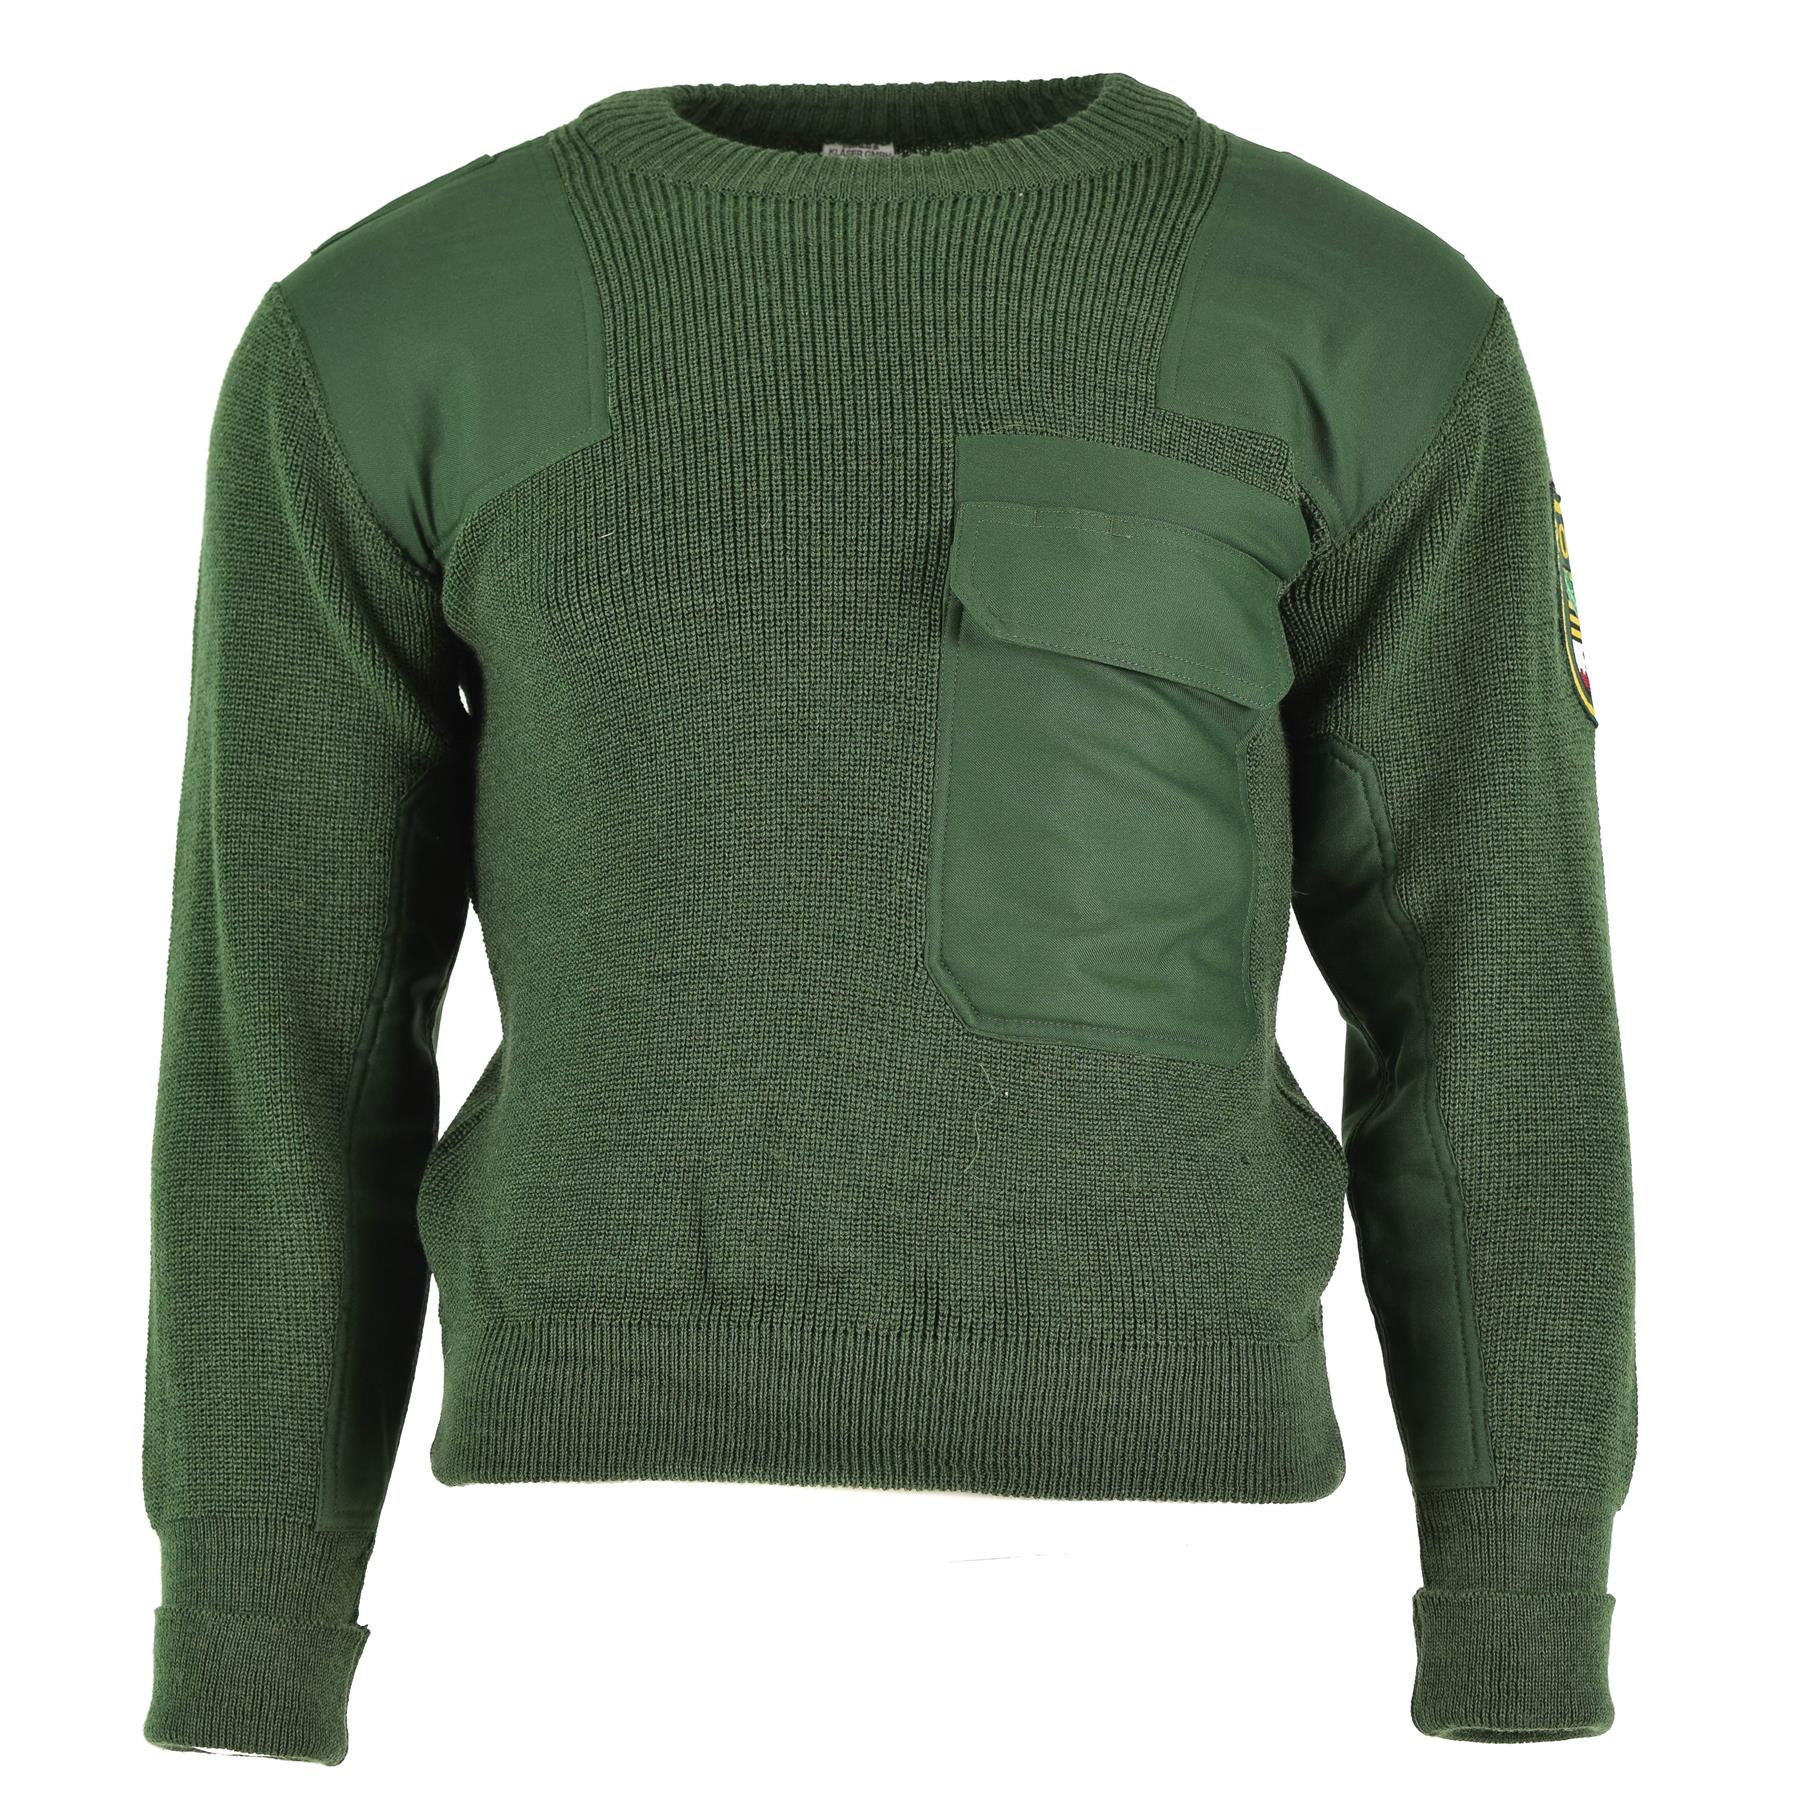 Genuine German army troops sweater green pullover military issue BDU ...